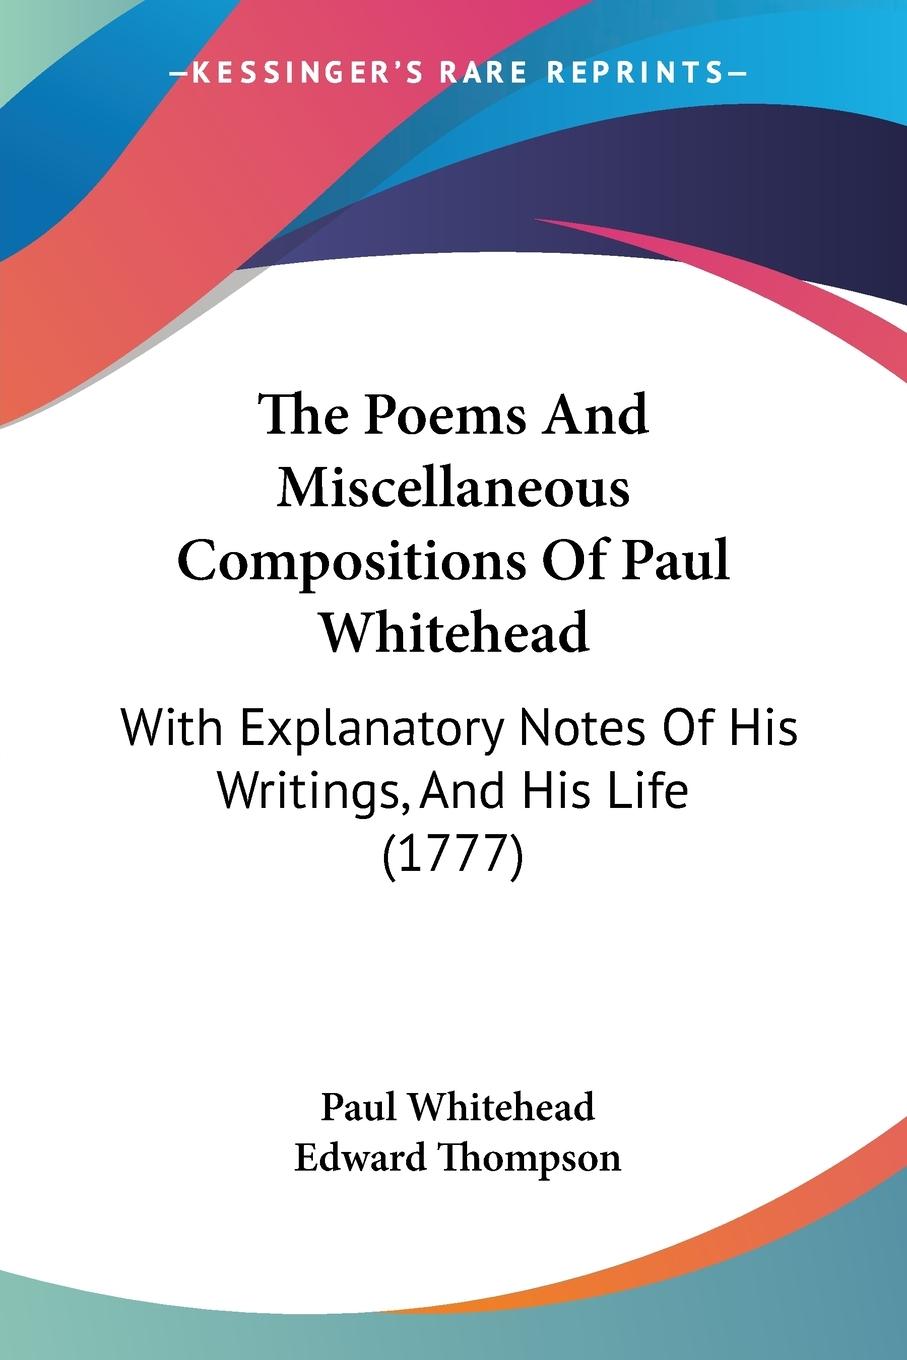 The Poems And Miscellaneous Compositions Of Paul Whitehead - Whitehead, Paul Thompson, Edward